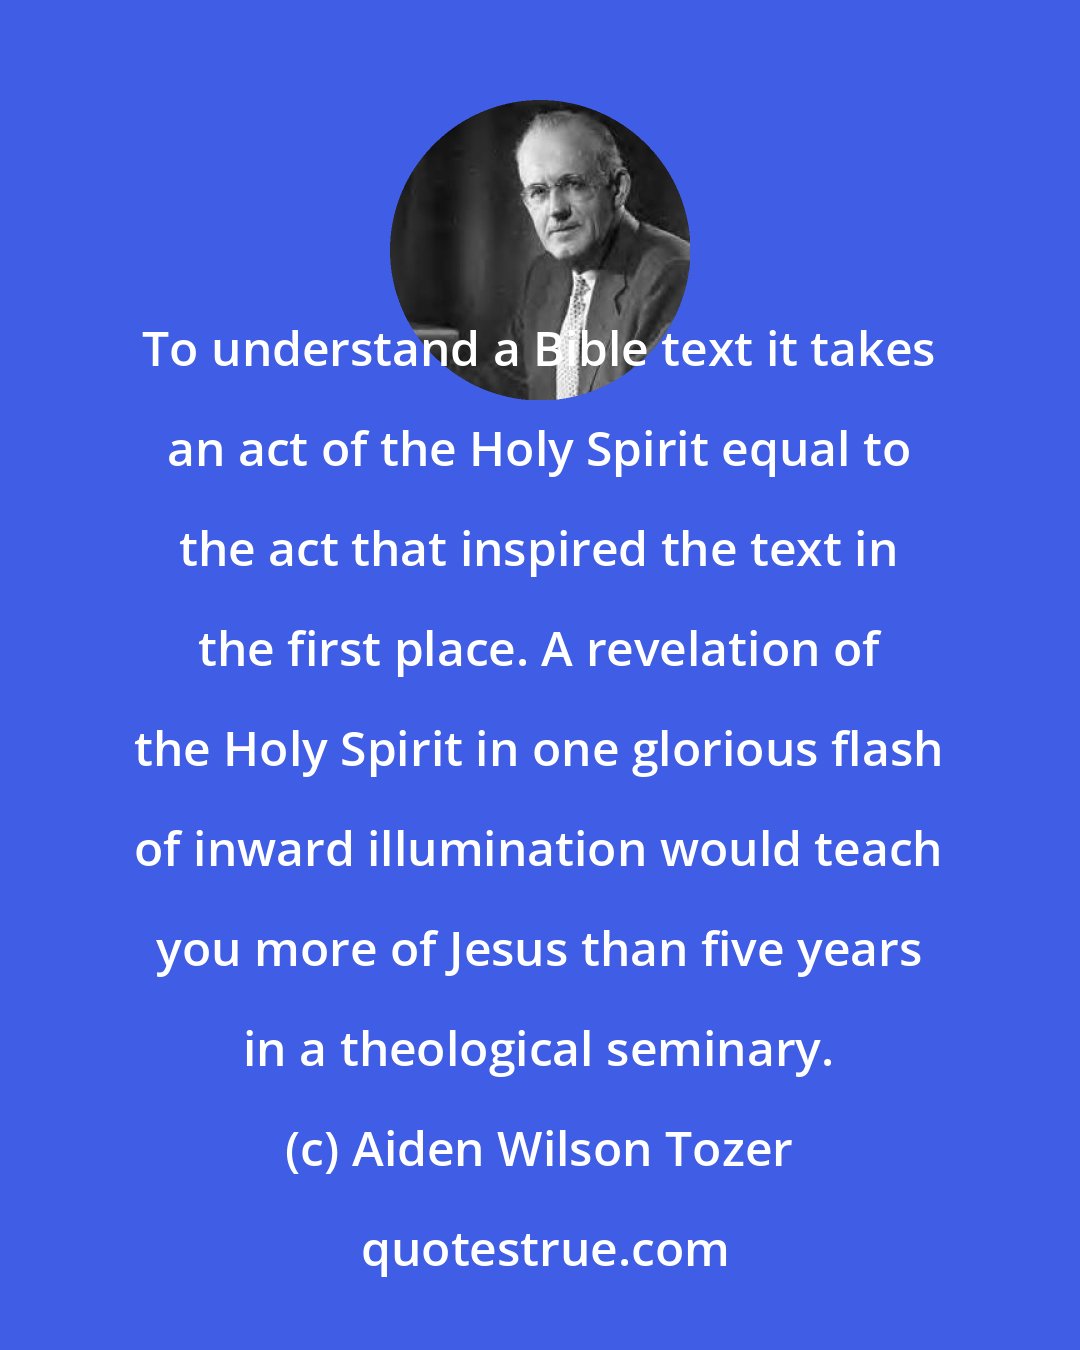 Aiden Wilson Tozer: To understand a Bible text it takes an act of the Holy Spirit equal to the act that inspired the text in the first place. A revelation of the Holy Spirit in one glorious flash of inward illumination would teach you more of Jesus than five years in a theological seminary.